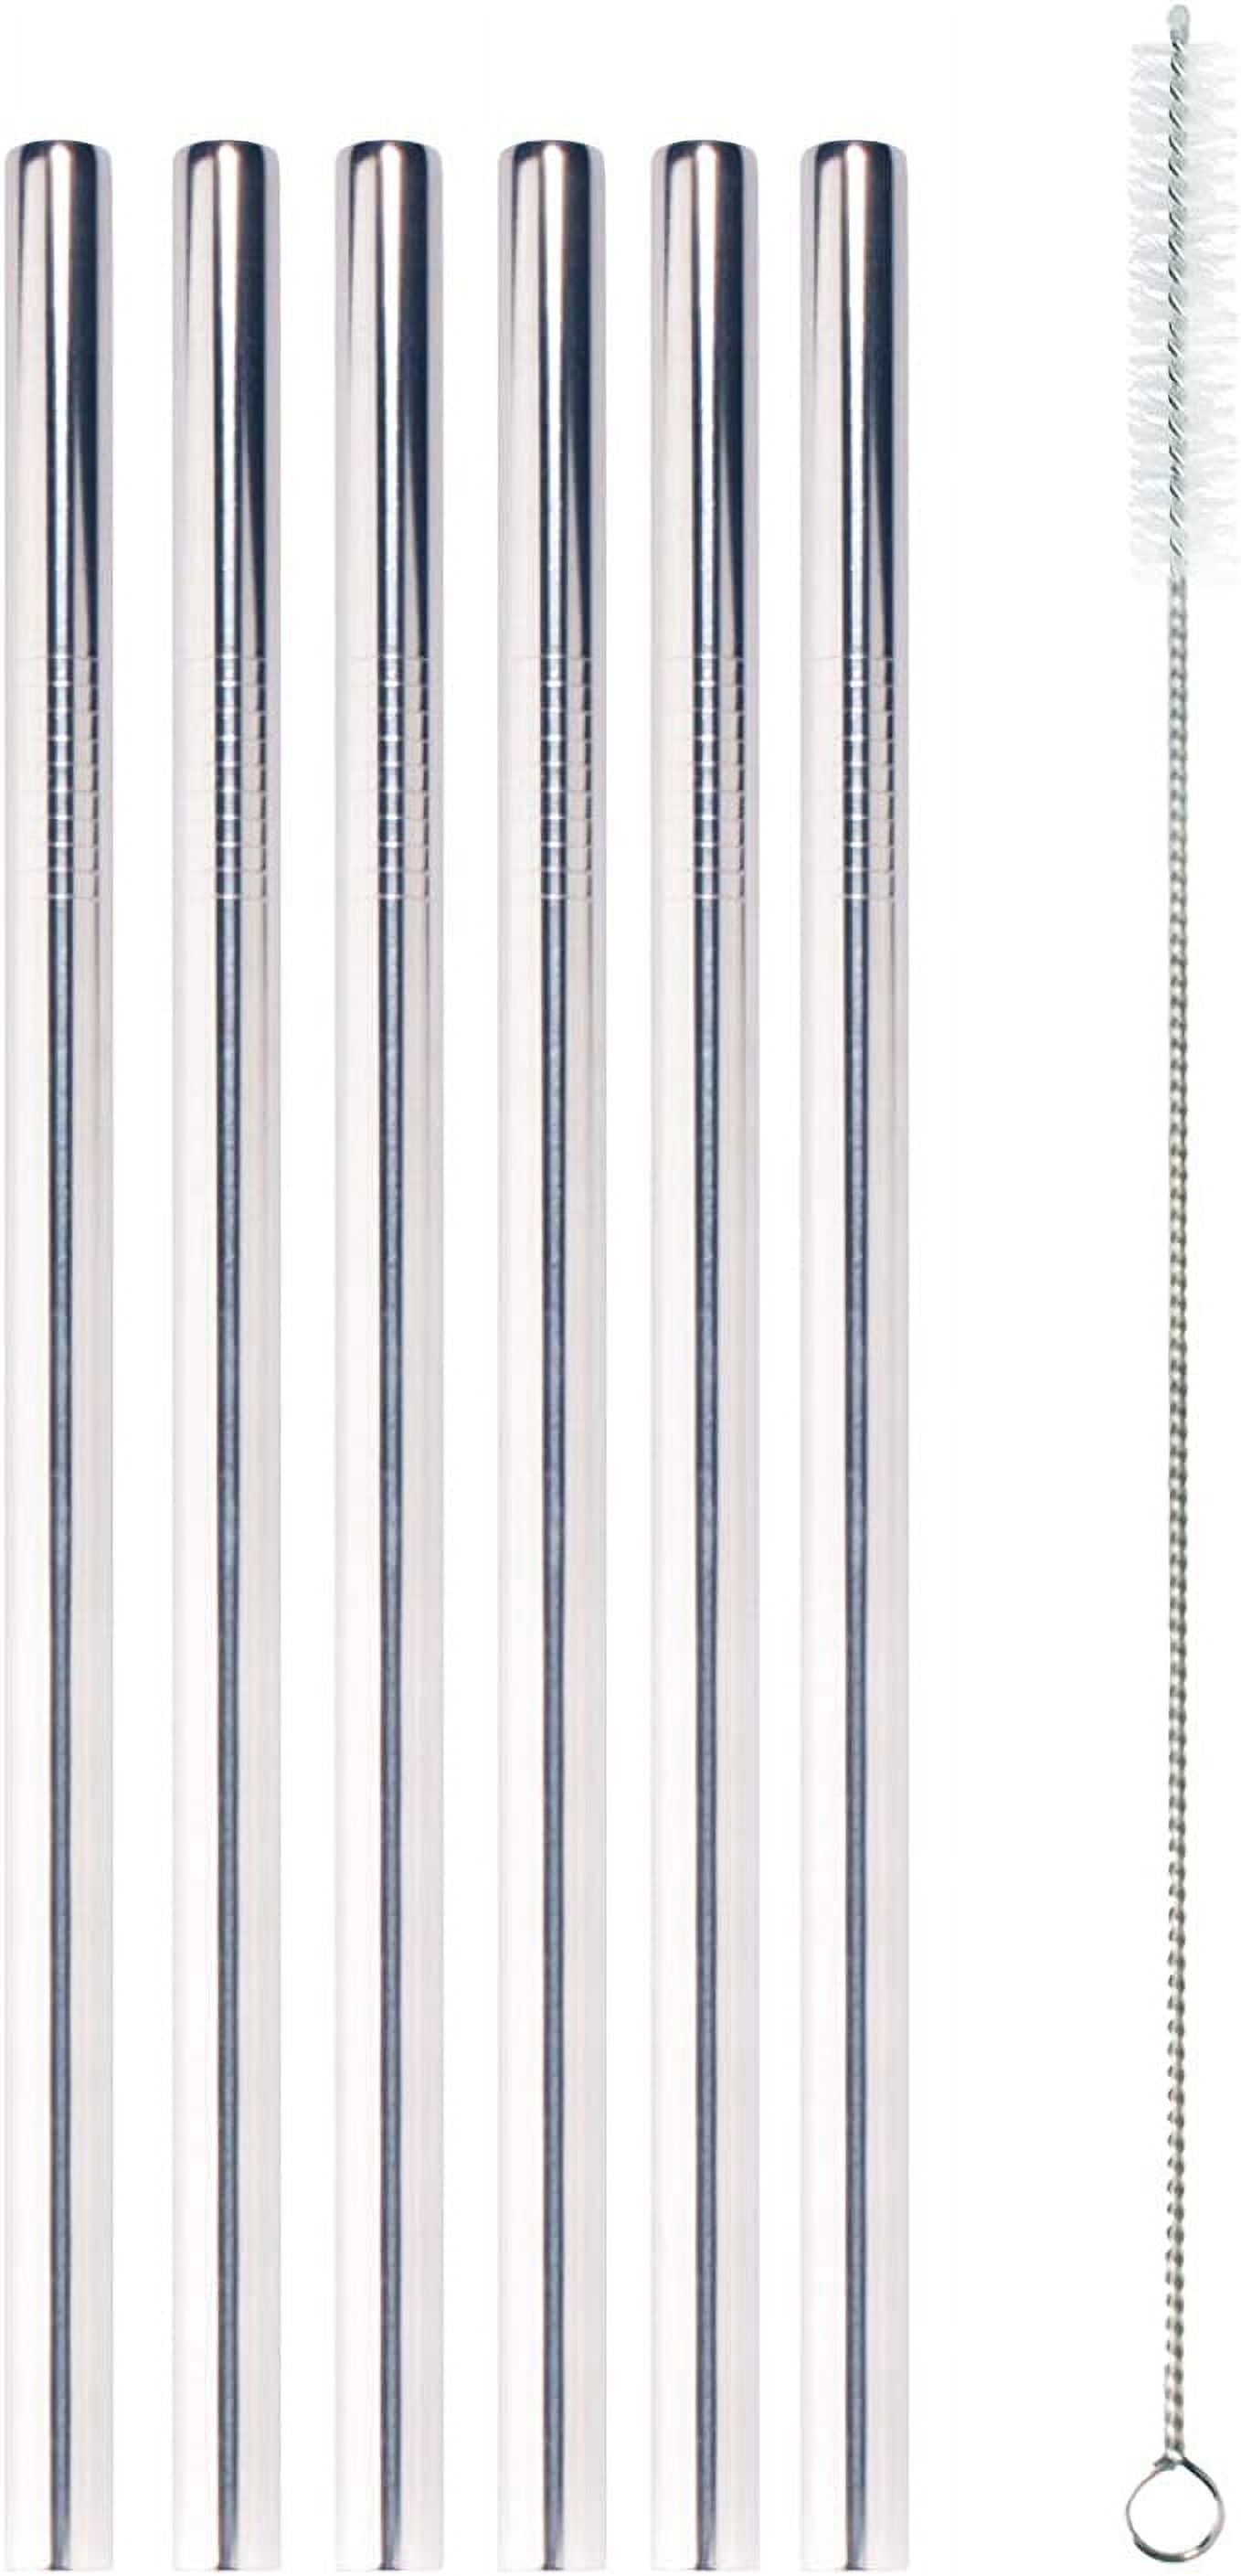 8 Piece 12 Inch Extra Long Reusable Metal Stainless Steel Thick Drinking  Straws